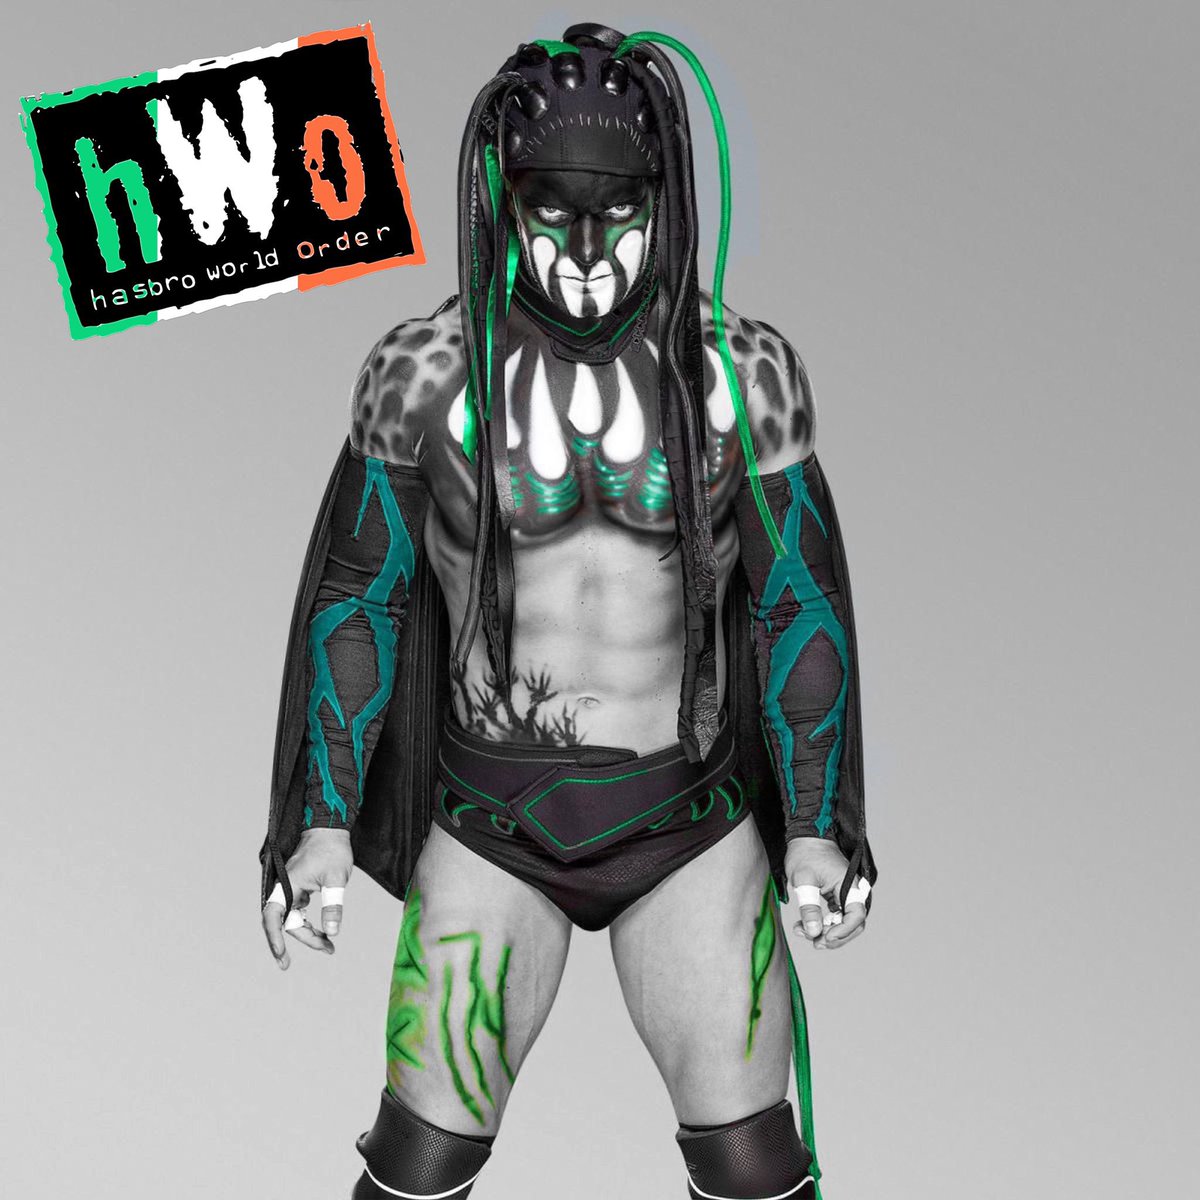 #HappyStPatricksDay 

Please share photos of any figures, merch or items of Irish wrestlers from your collection to celebrate St Patrick’s Day 🇮🇪

#hWo #StPatricksDaySlam 
#stpatricksday2022